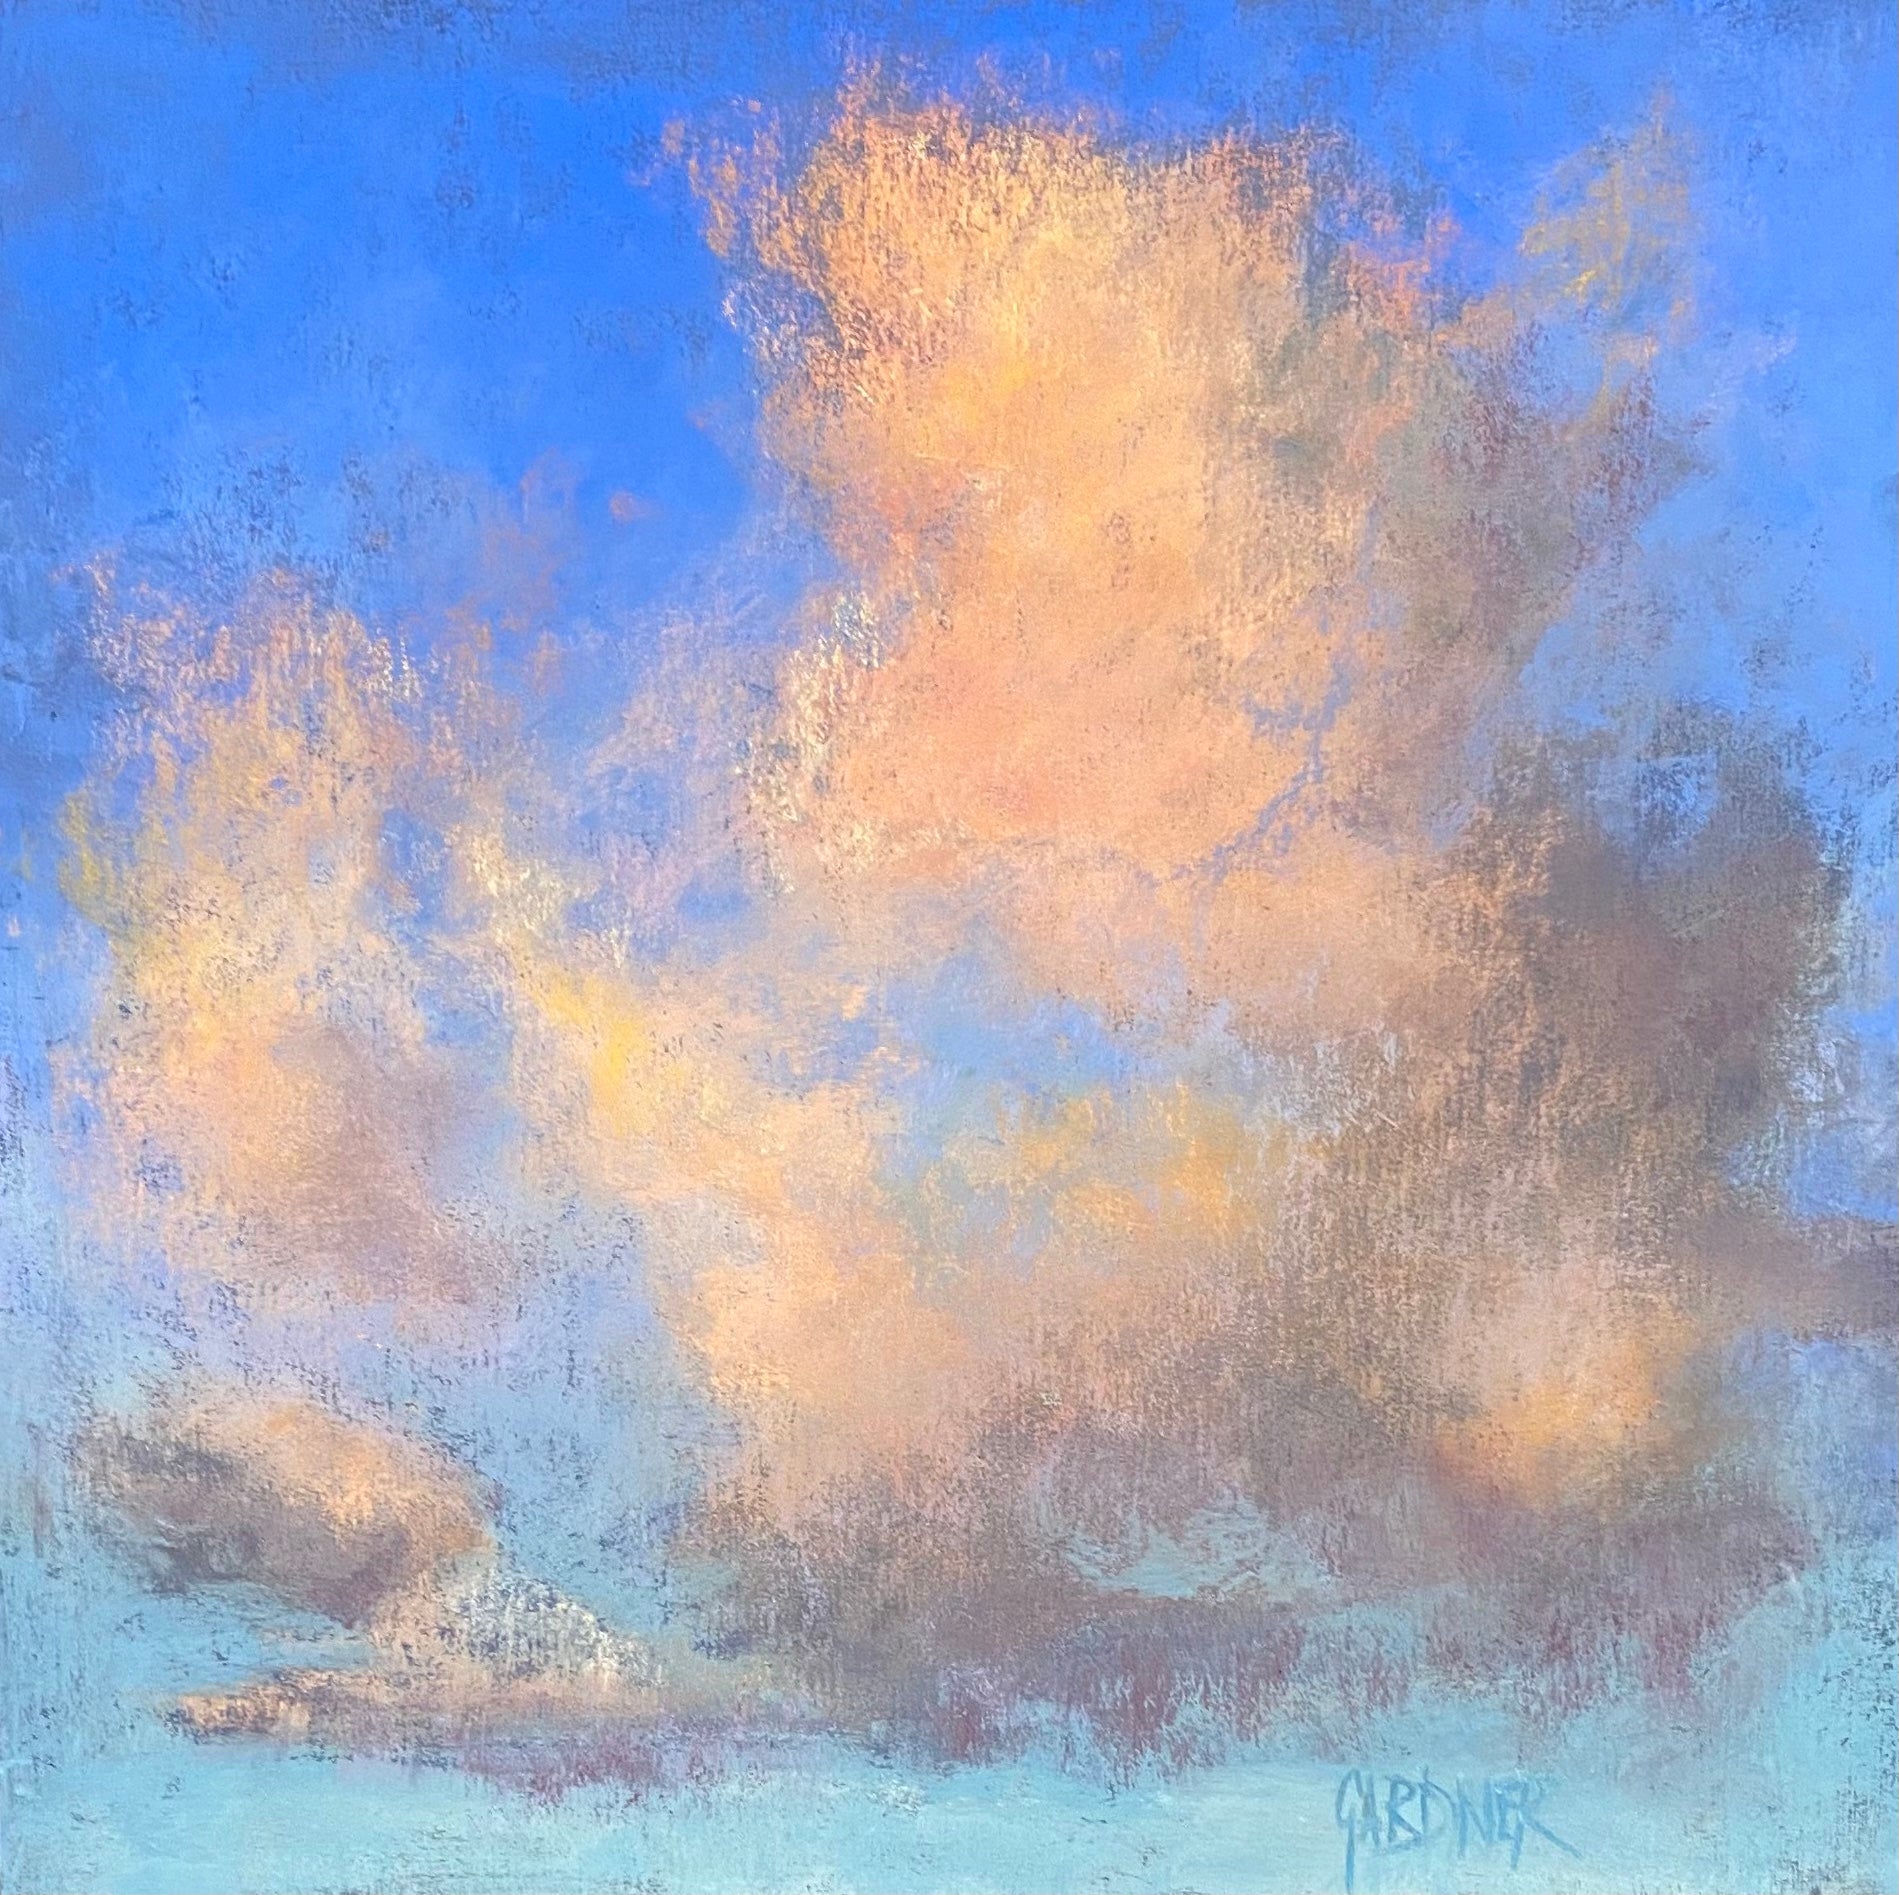 Dina Gardner Landscape Painting - Evening Clouds, Original Sky Painting in Pastel on Board, 2021